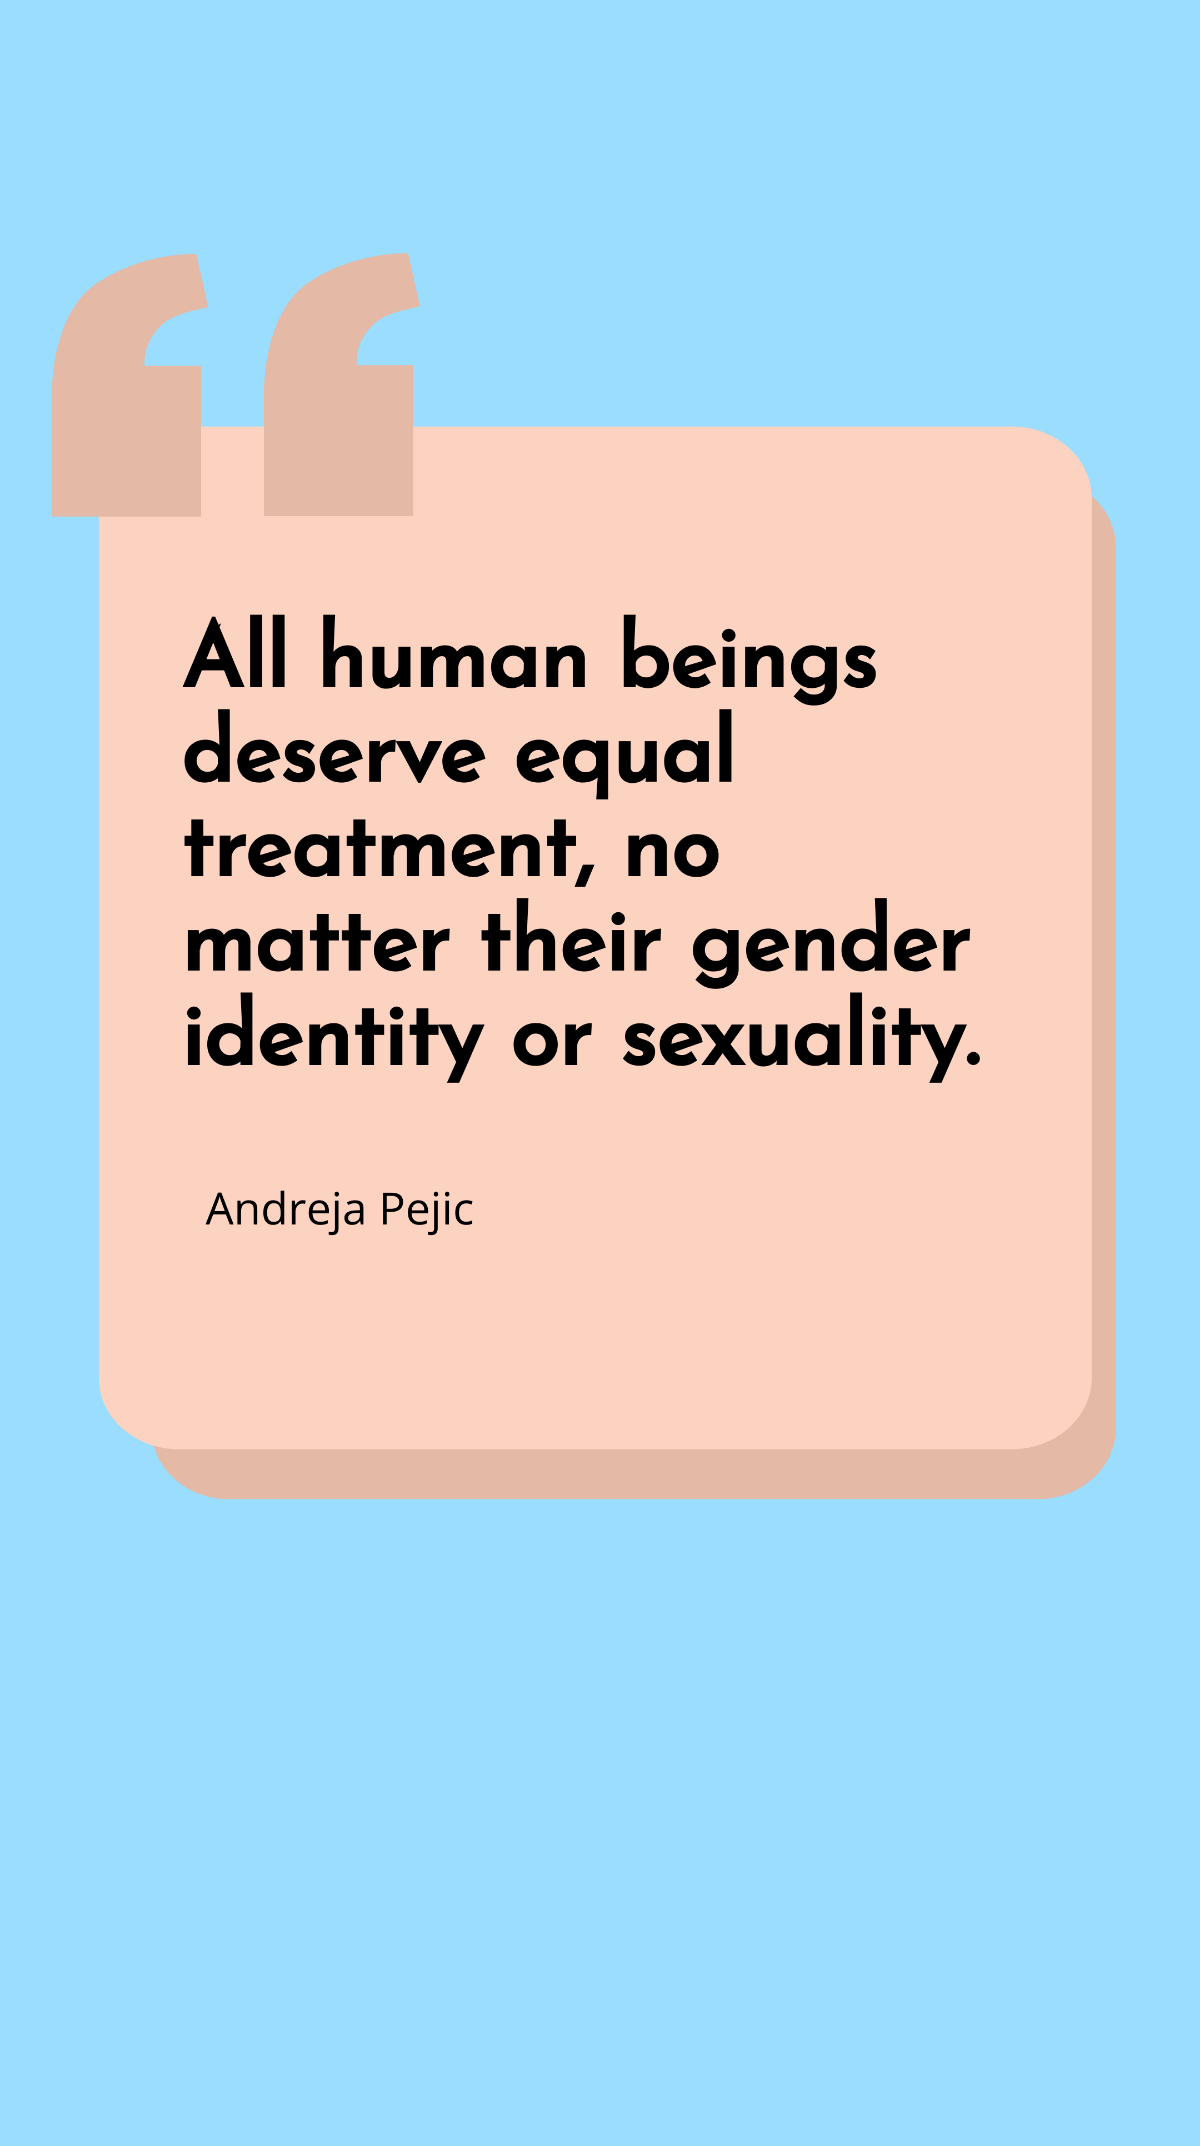 Andreja Pejic - All human beings deserve equal treatment, no matter their gender identity or sexuality. Template